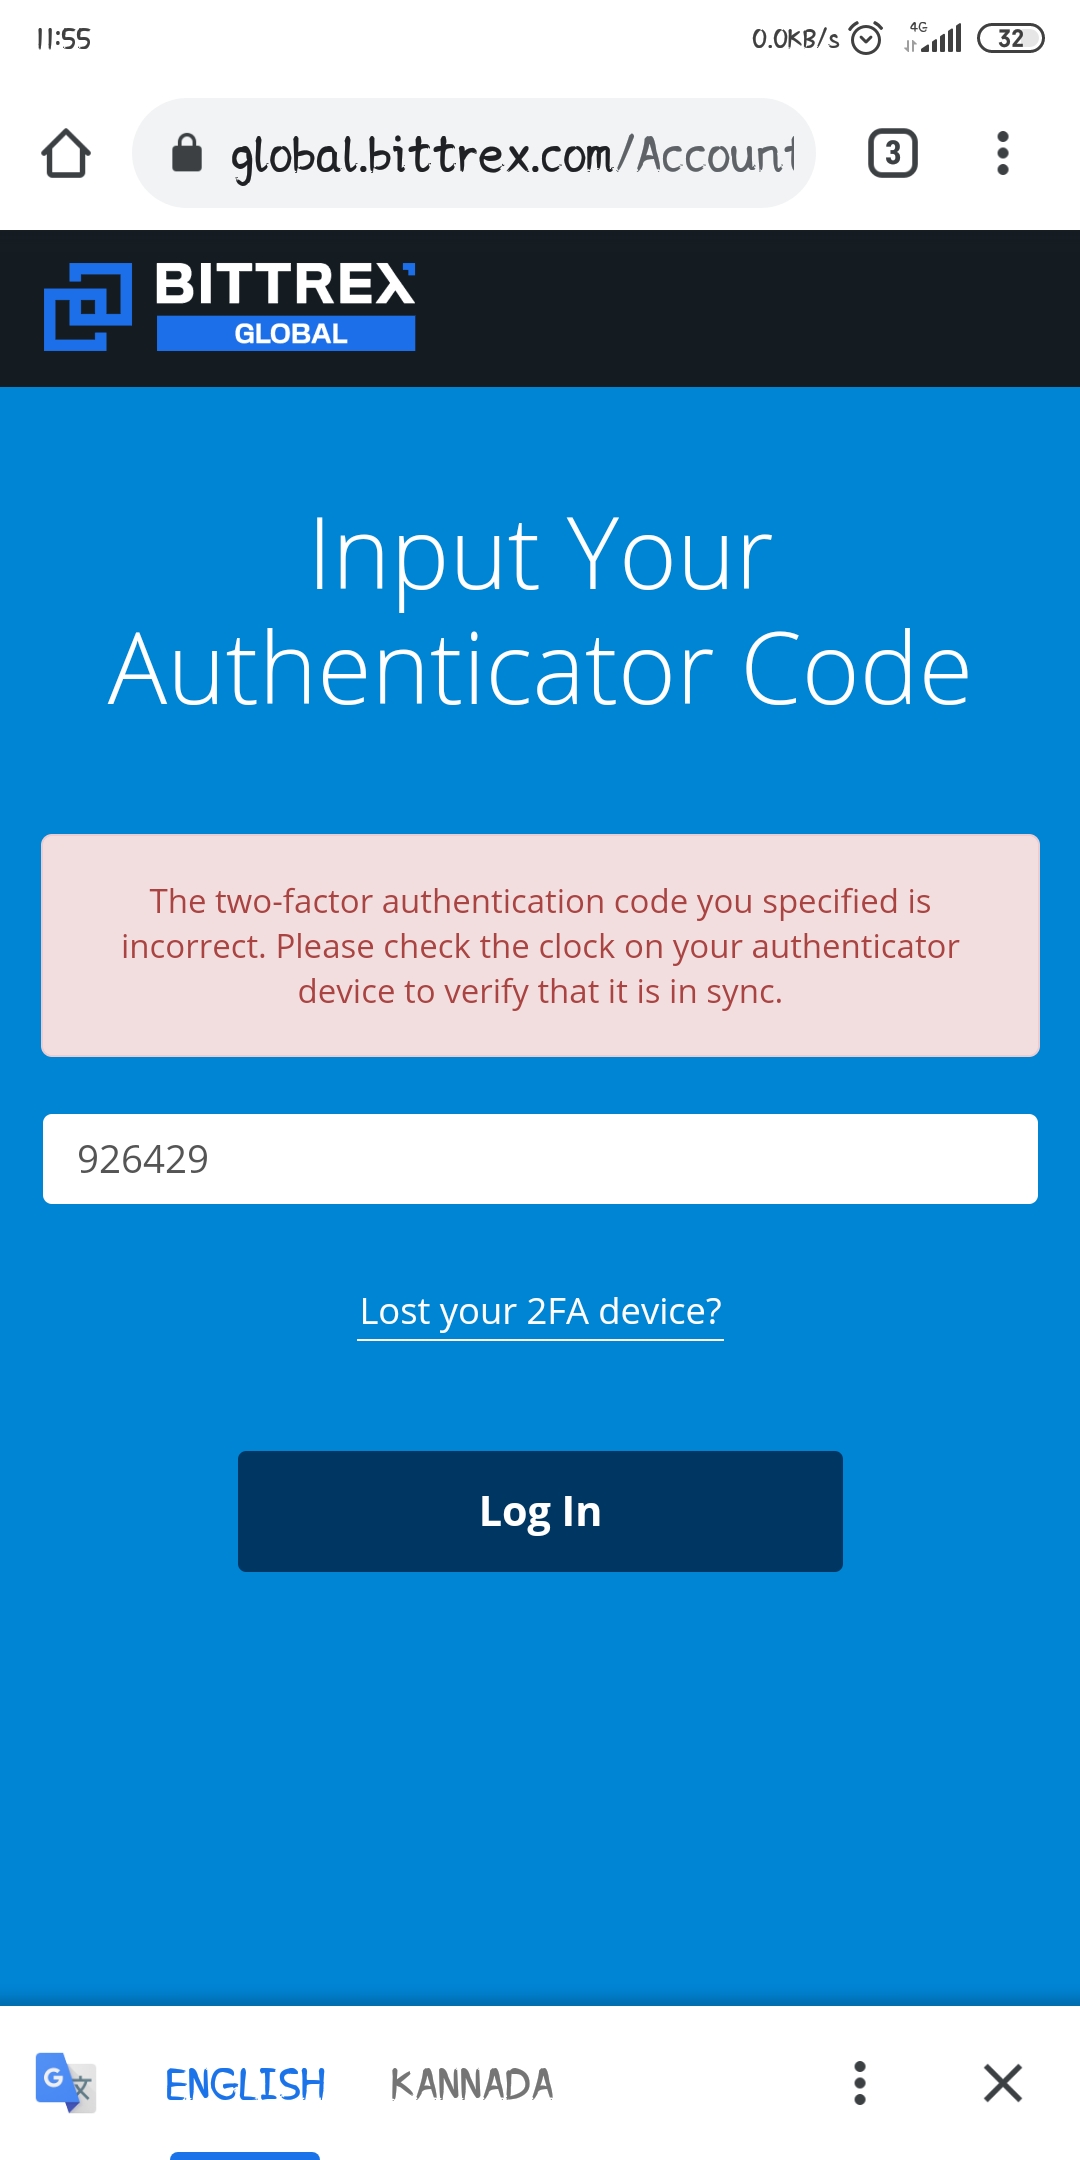 How can i get 2fa authenticator? My laptop lost & i cant log in bittrex ...